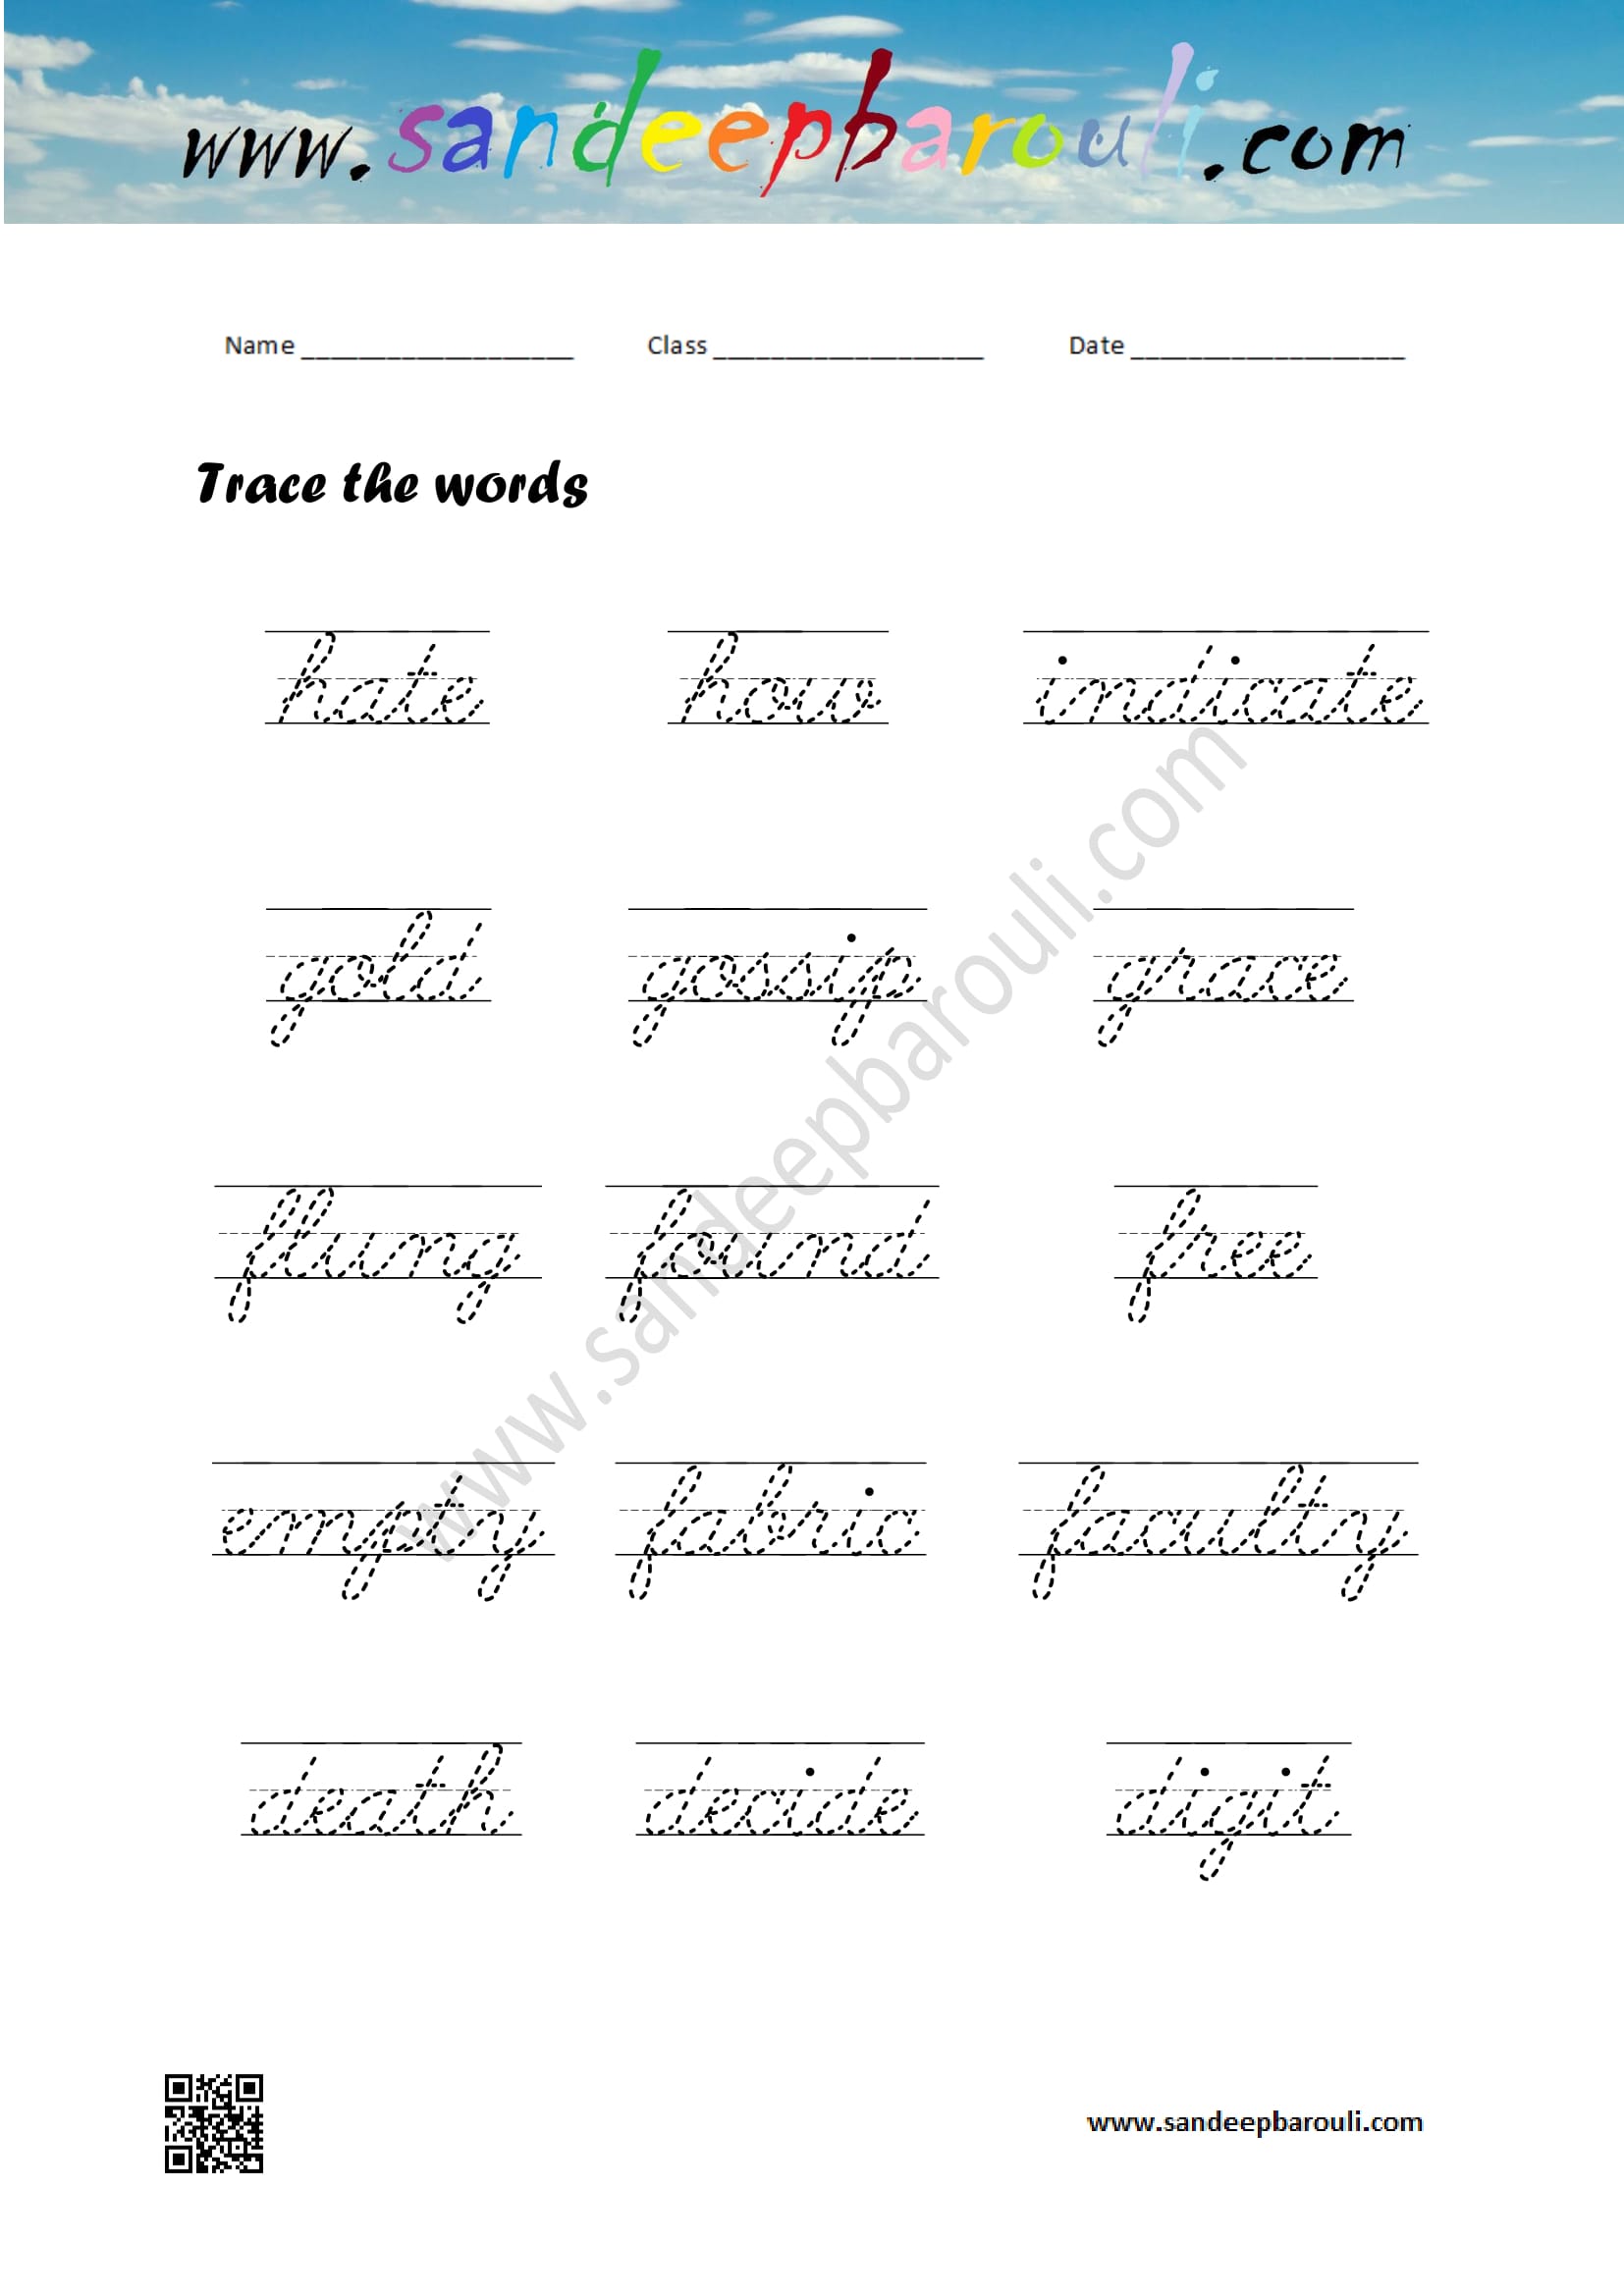 Cursive Writing Worksheet – Trace the words (73)